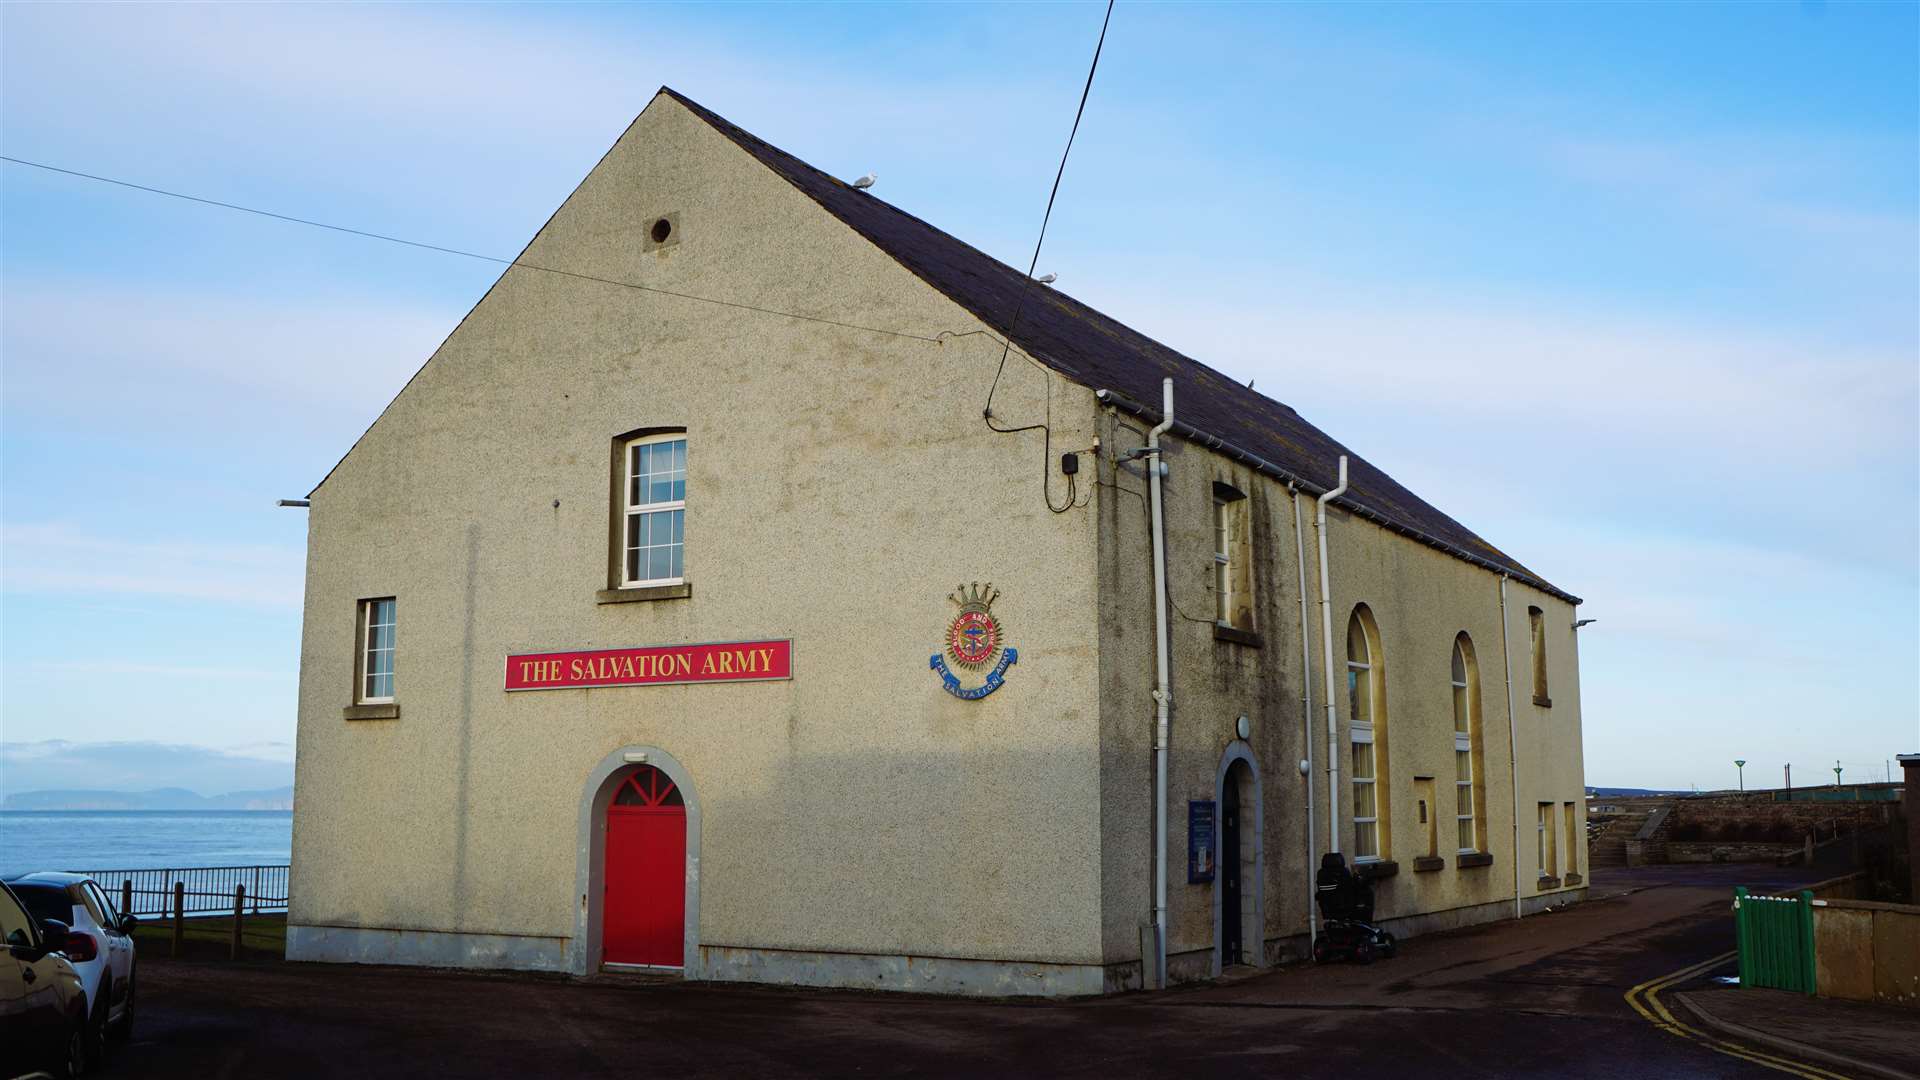 The Salvation Army premises in Thurso are set to close in April